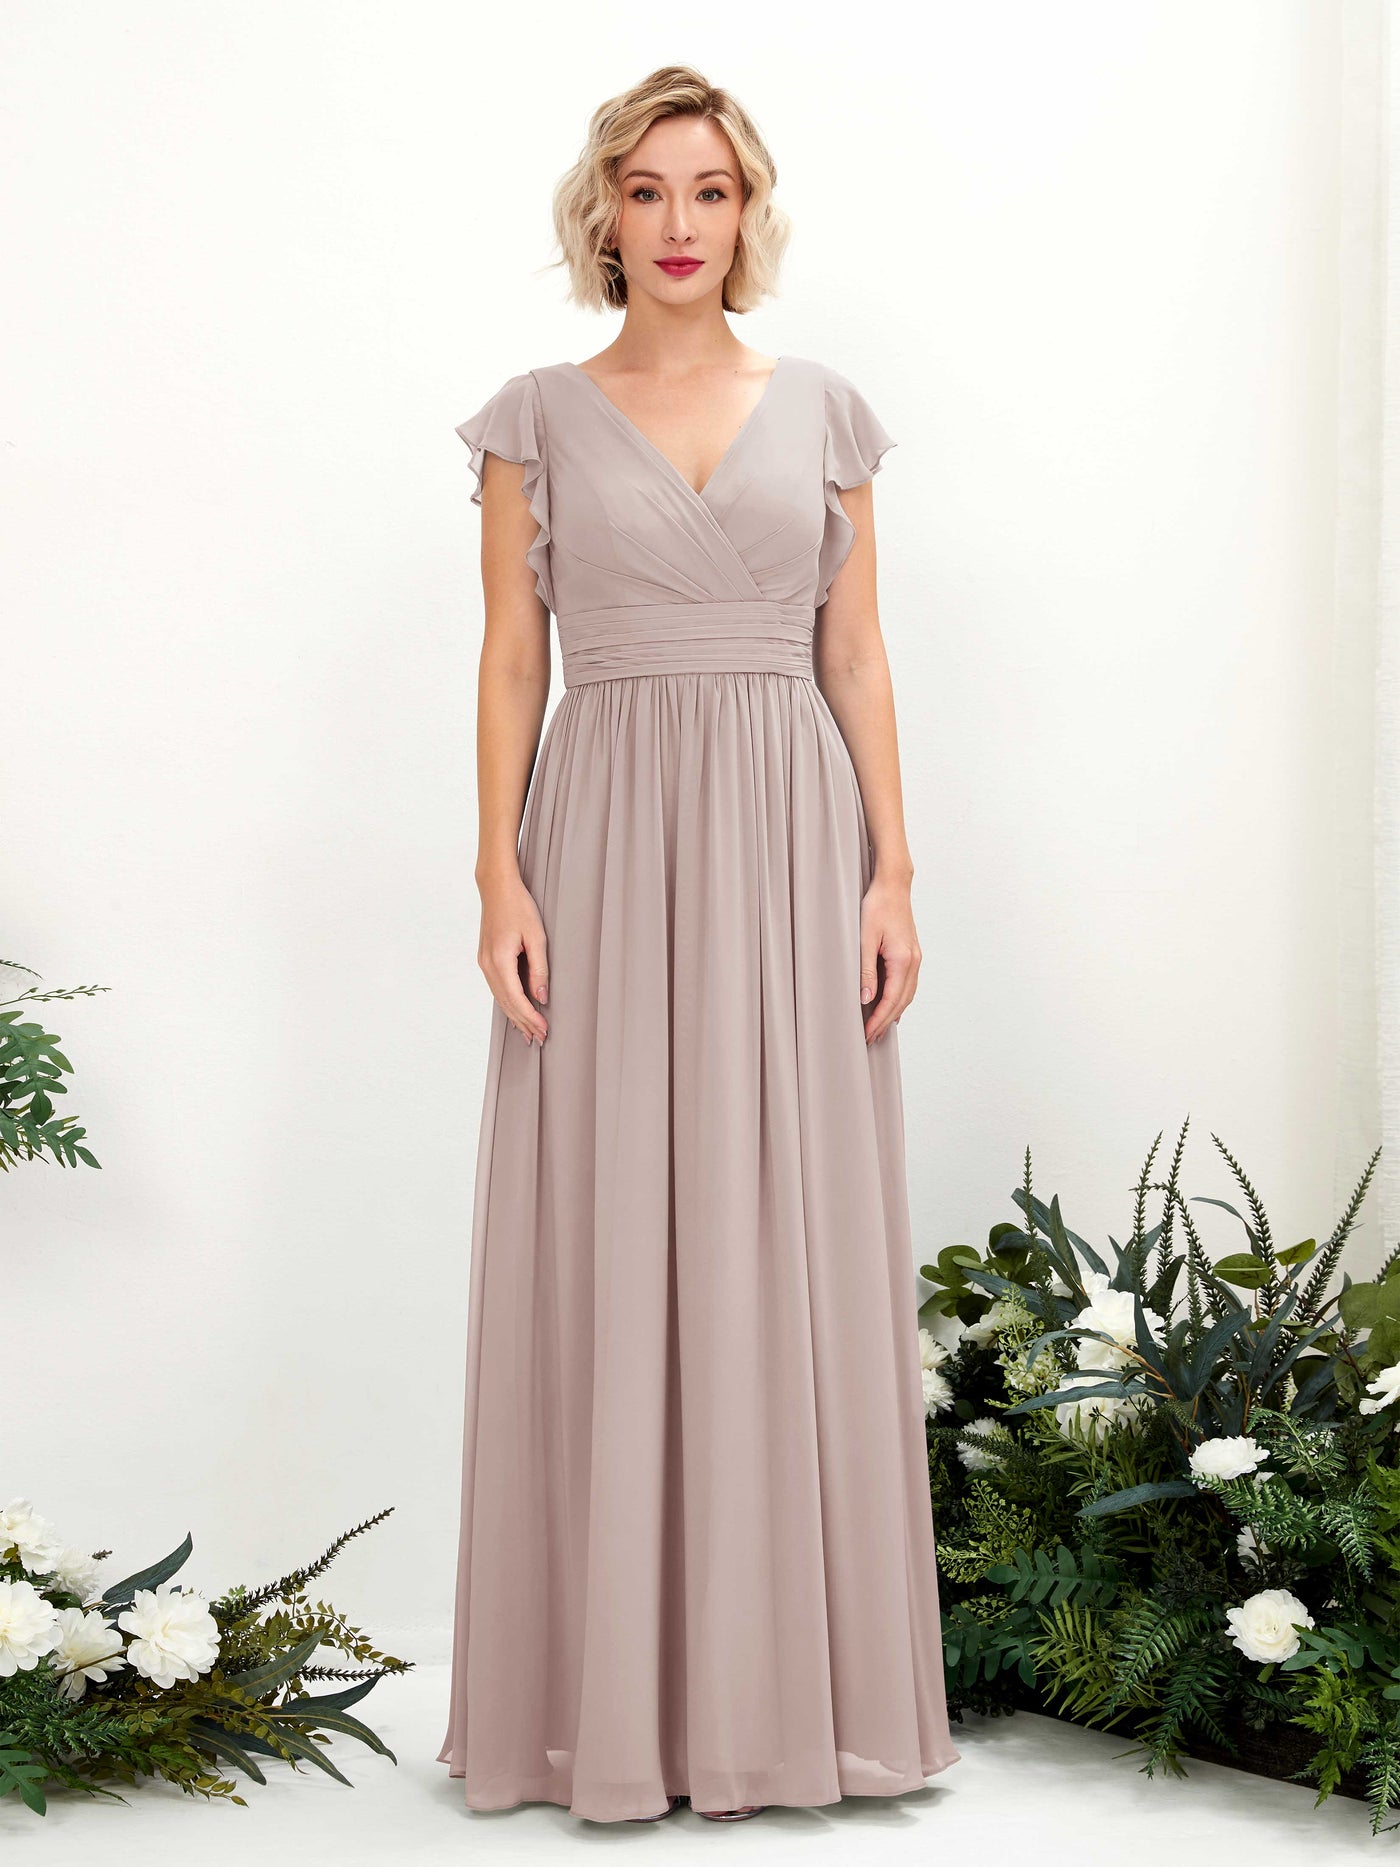 Taupe Bridesmaid Dresses Bridesmaid Dress A-line Chiffon V-neck Full Length Short Sleeves Wedding Party Dress (81222724)#color_taupe